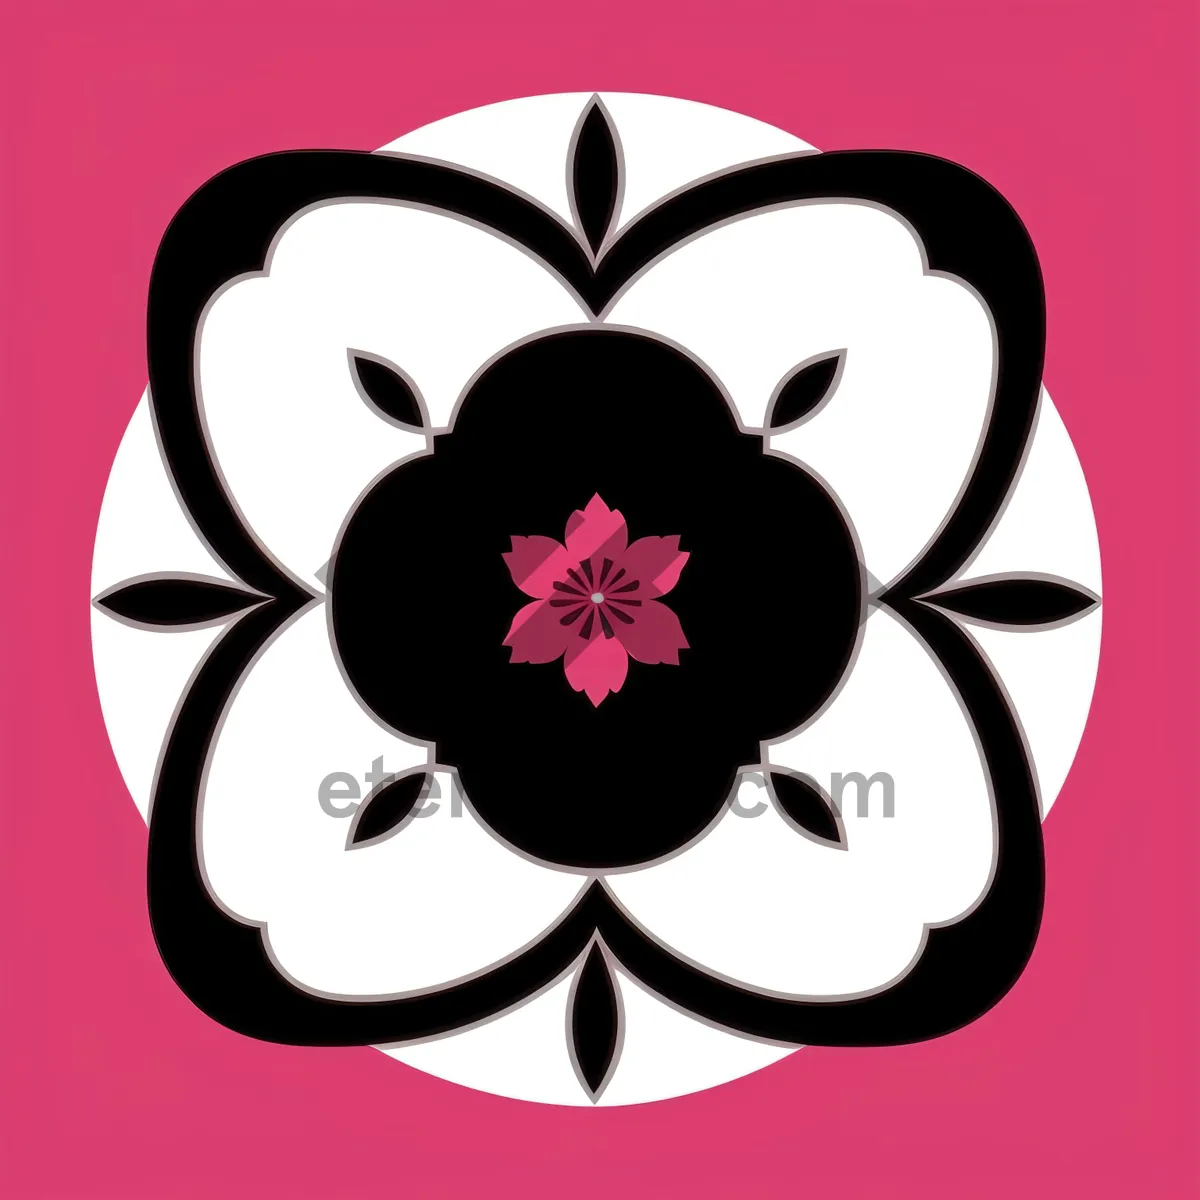 Picture of Floral Artistic Lotus Design with Decorative Elements.